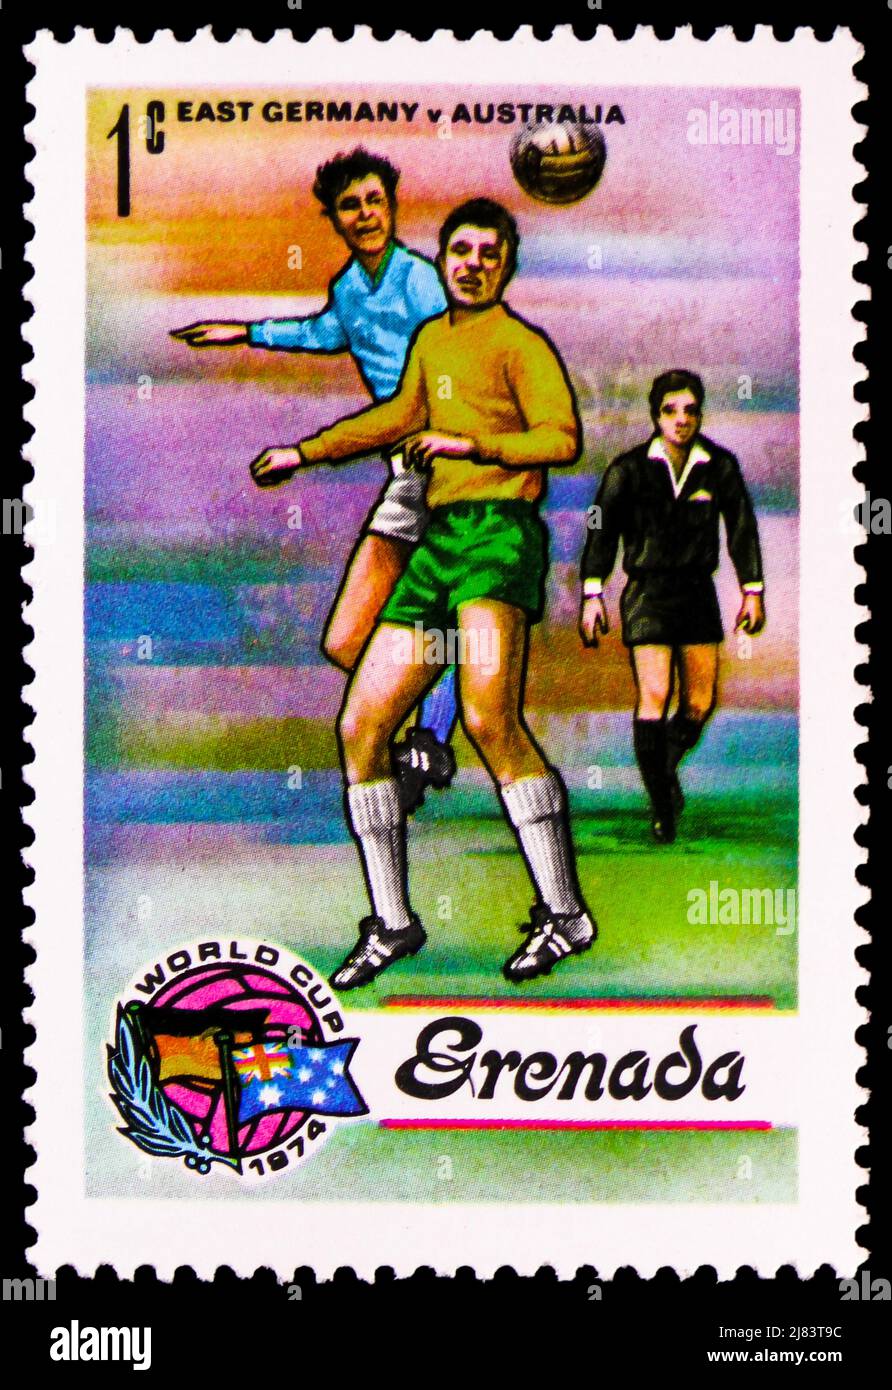 MOSCOW, RUSSIA - APRIL 10, 2022: Postage stamp printed in Grenada shows East Germany vs Australia, FIFA World Cup Football Championship 1974, West Ger Stock Photo